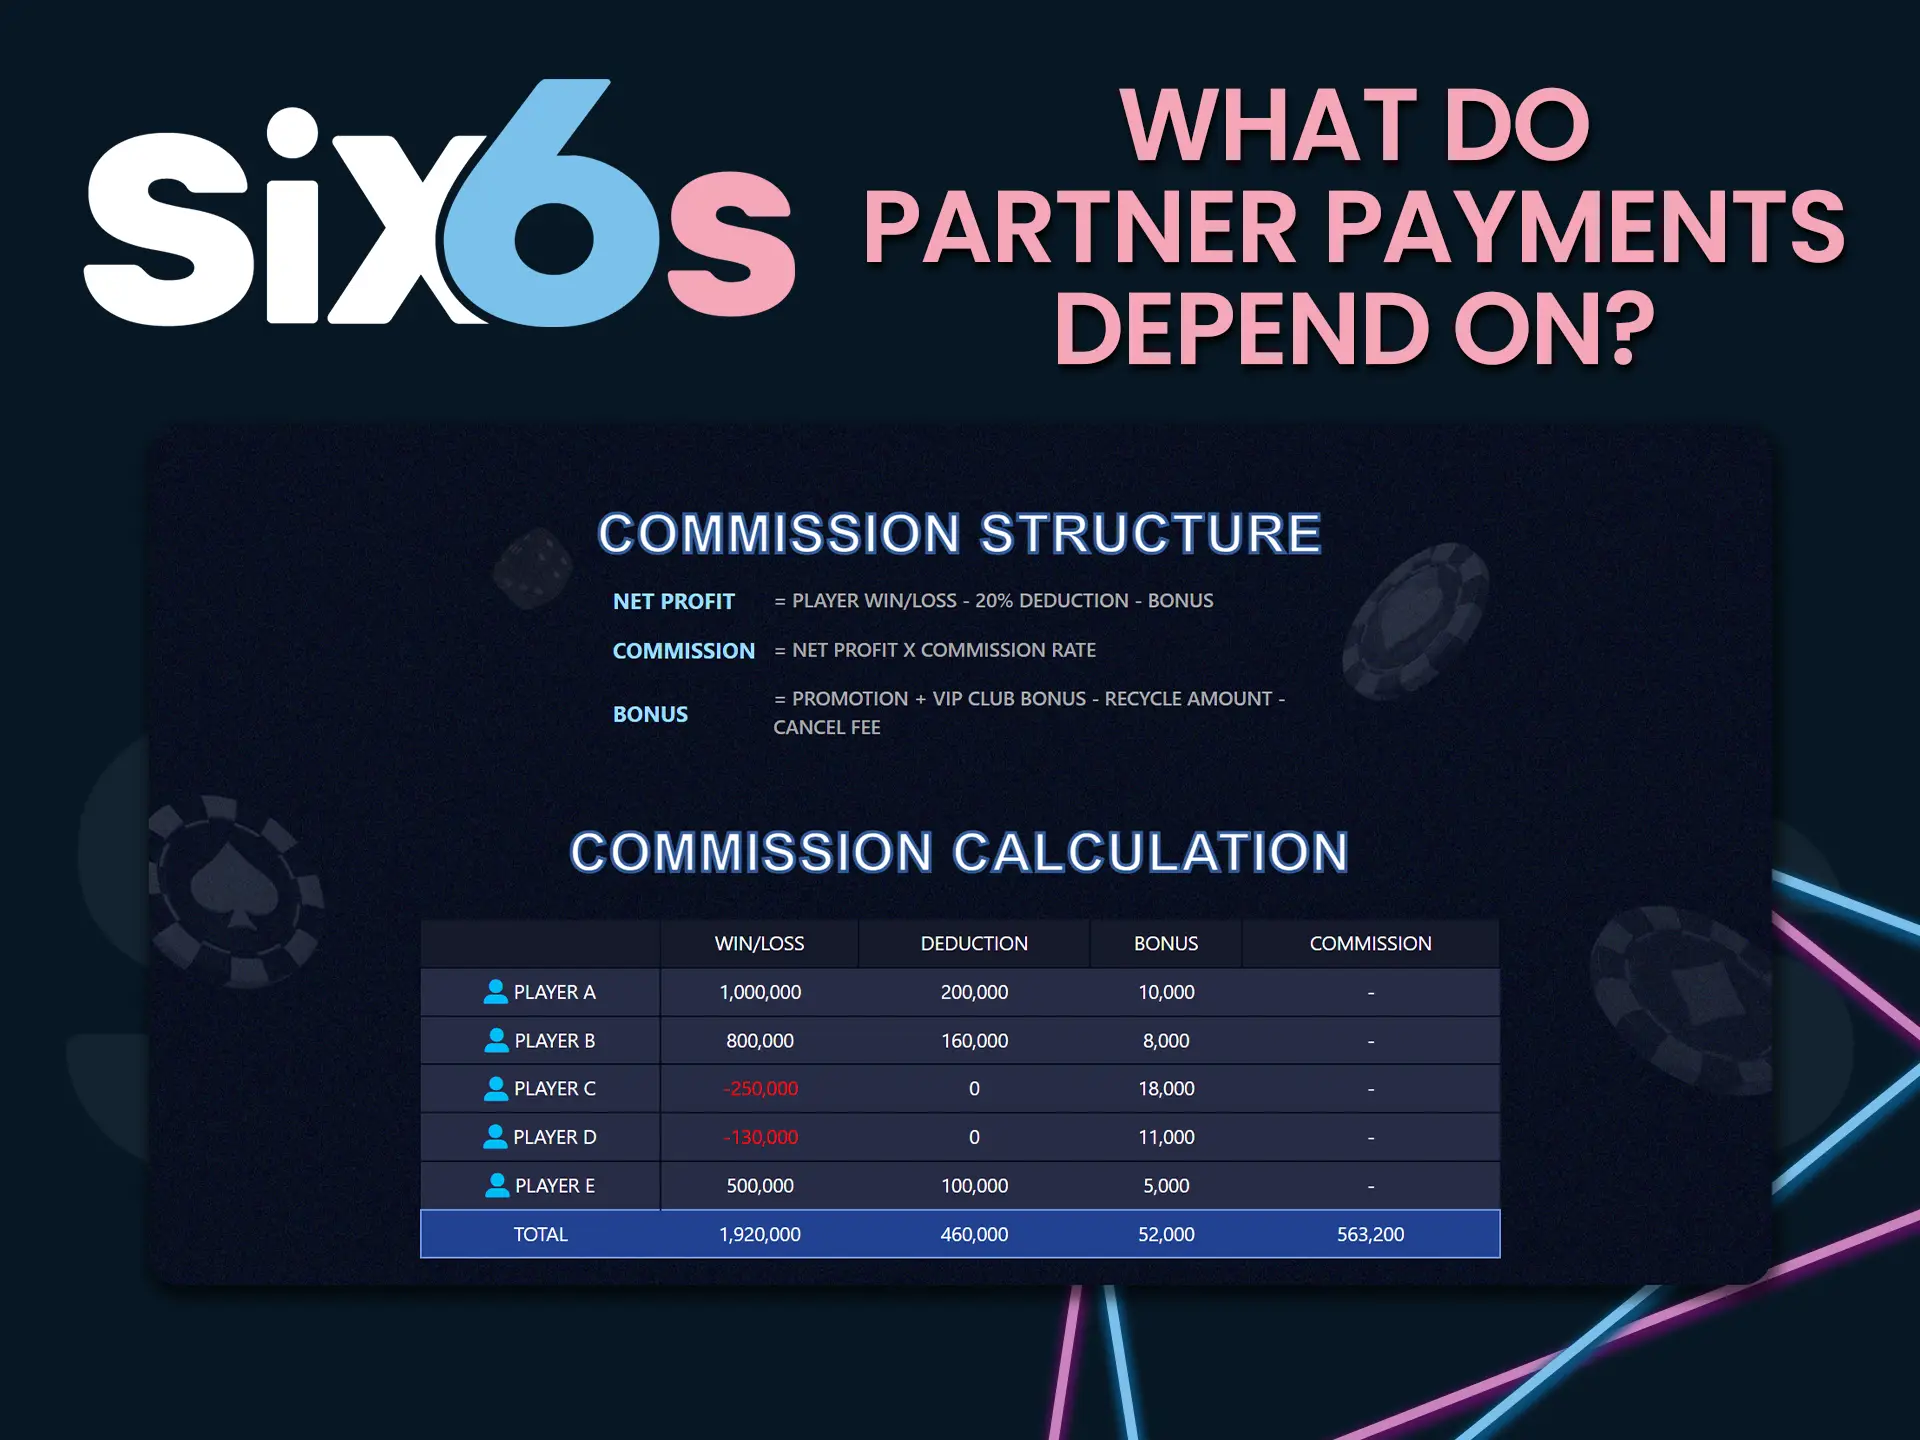 There are several reasons why Six6s affiliate payouts depend on.